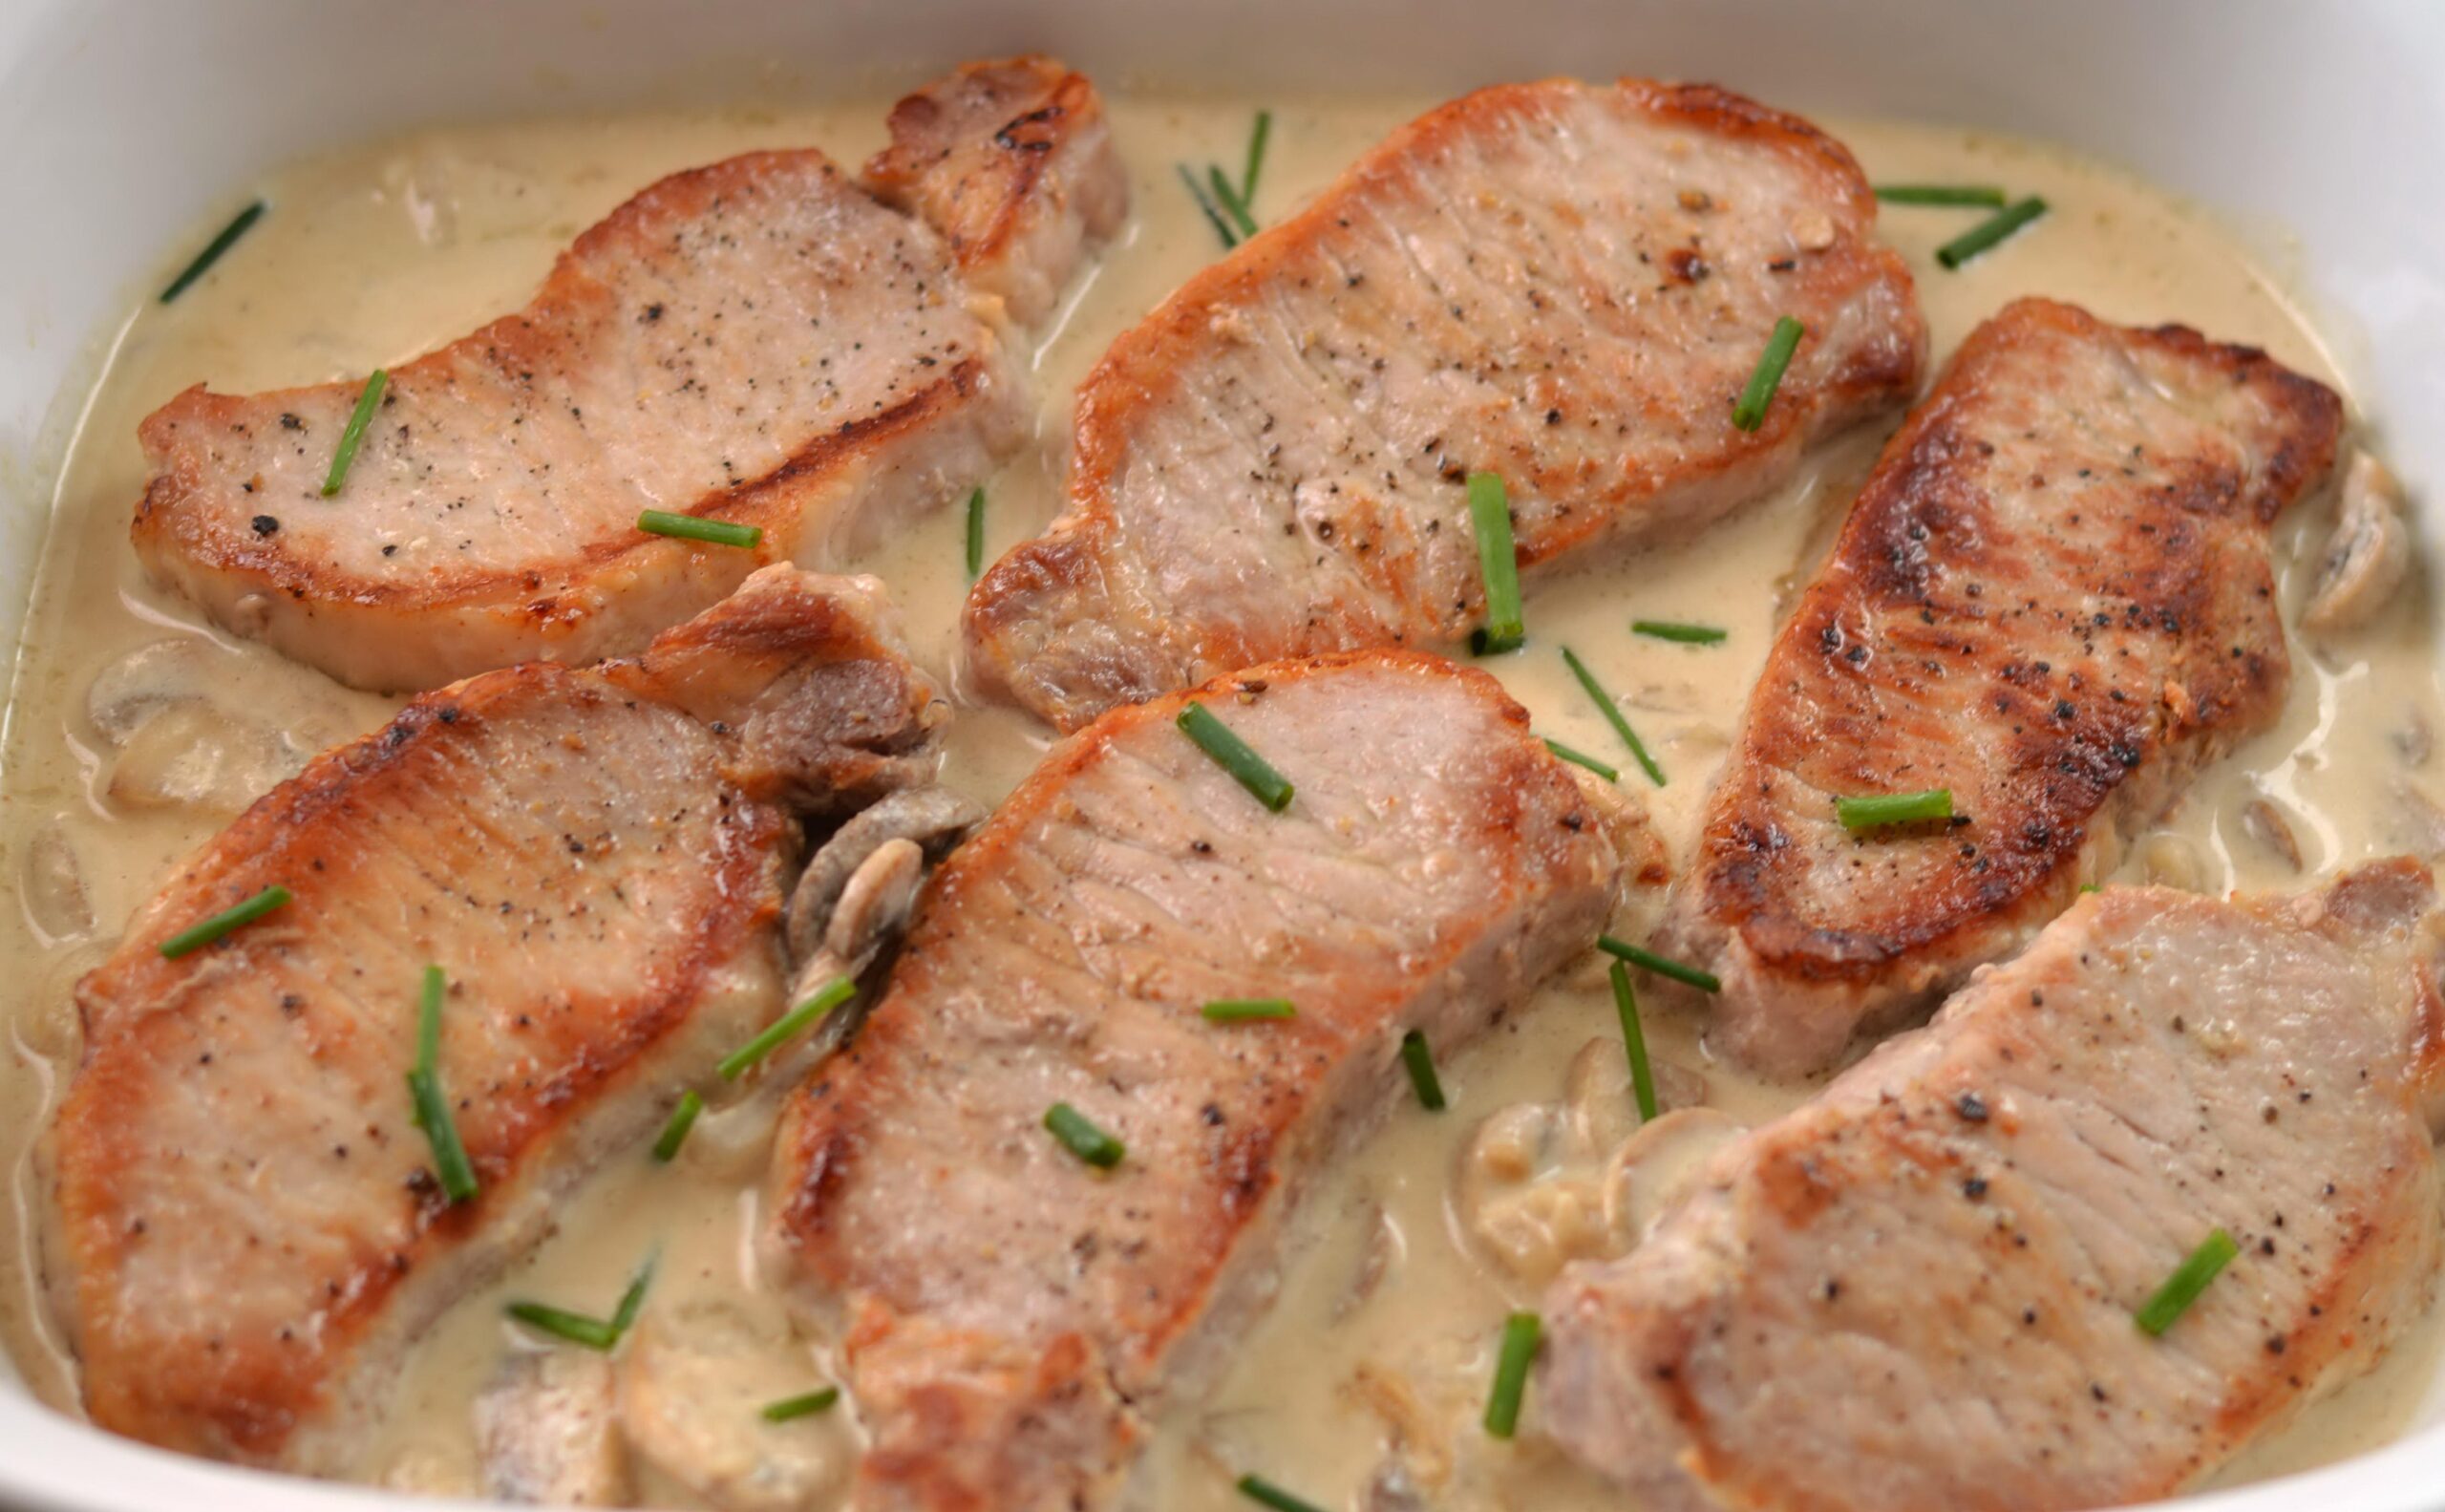  These pork chops are seared to perfection